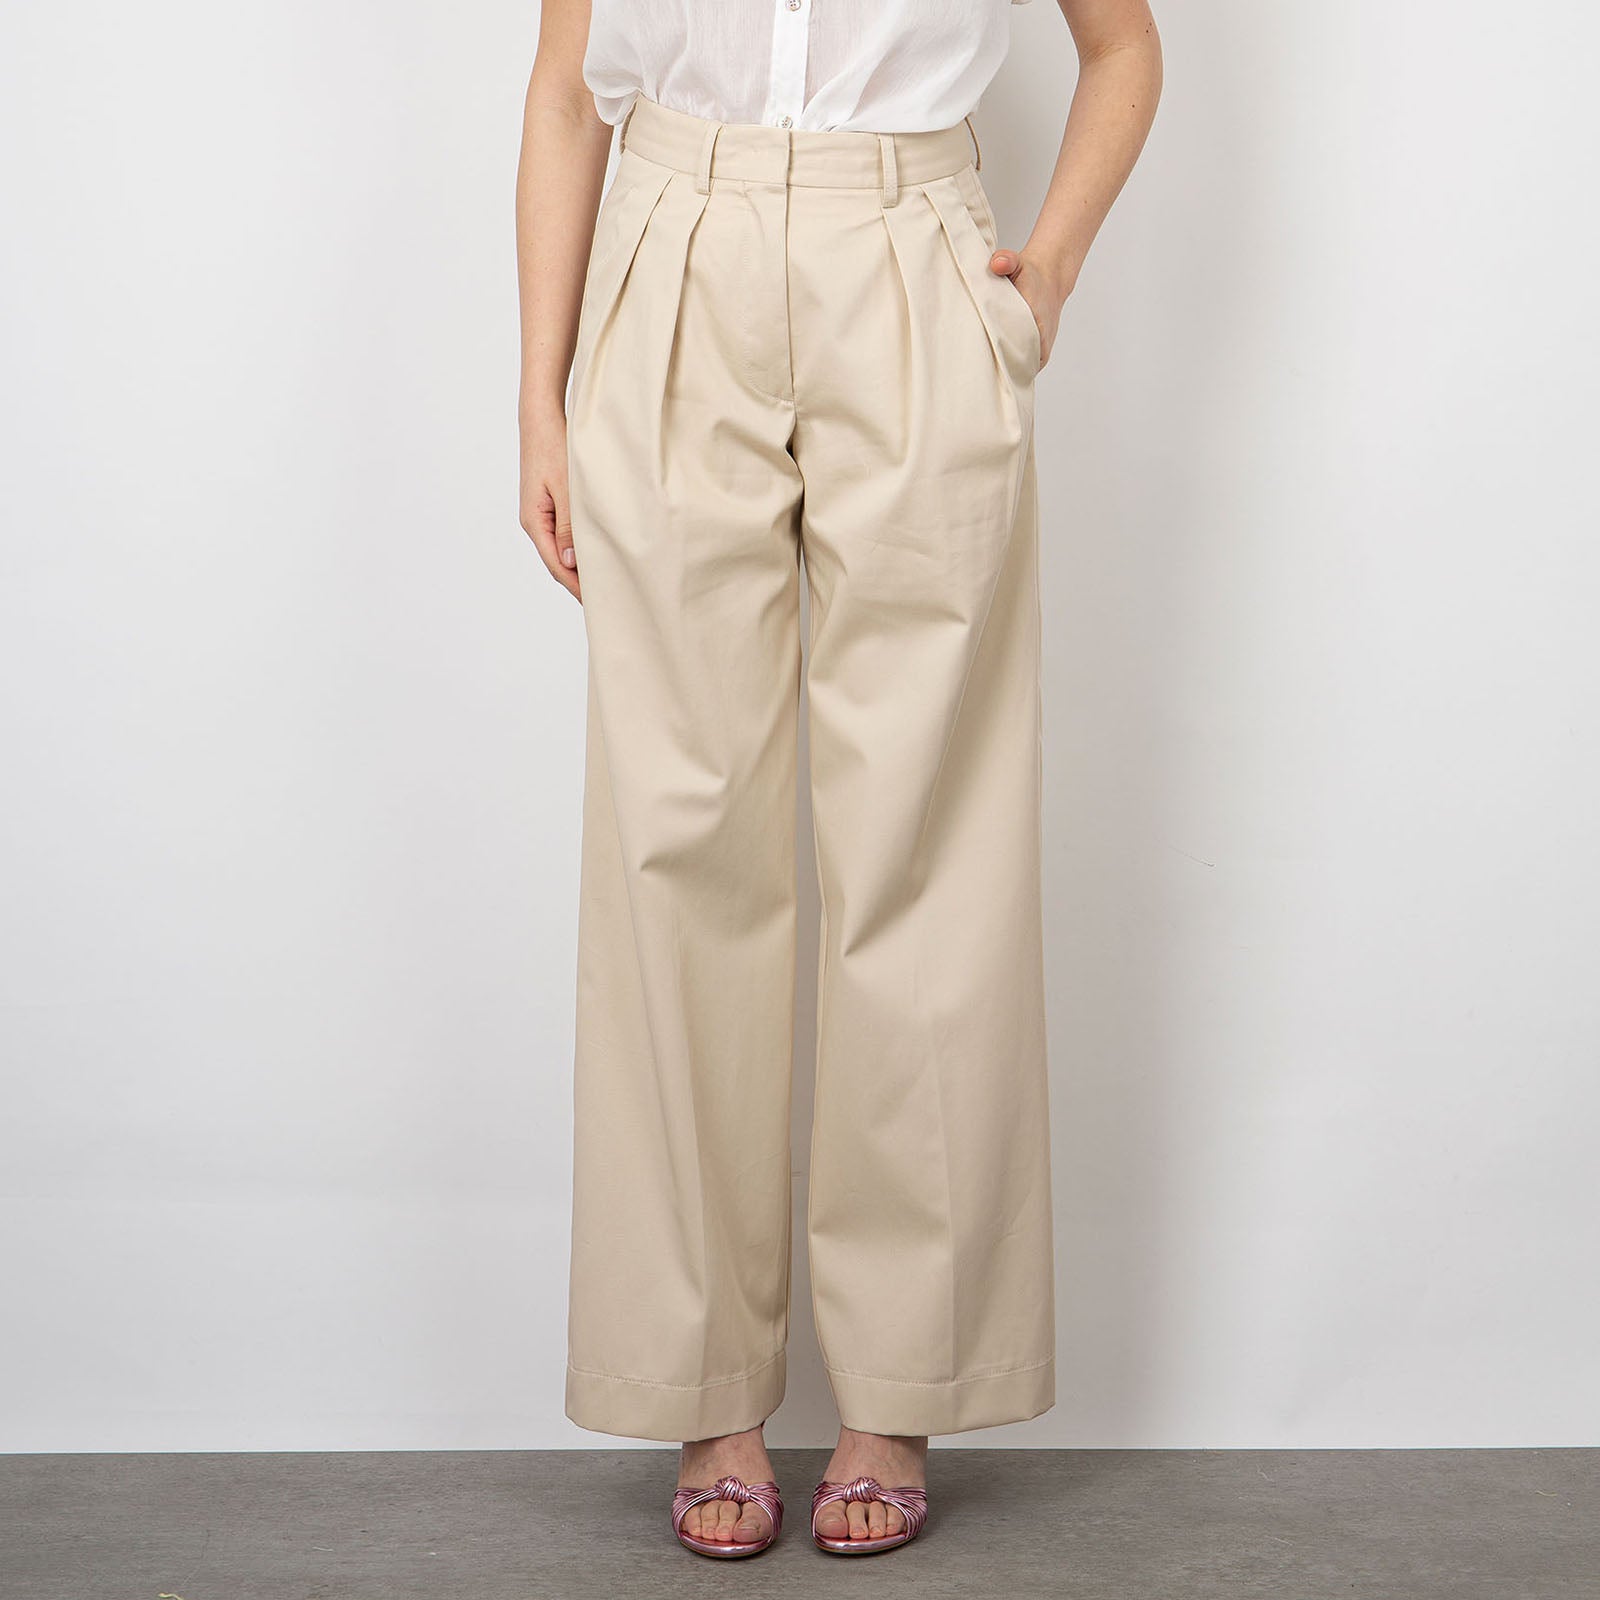 Forte Forte Pleated Trousers in Sand Cotton - 6